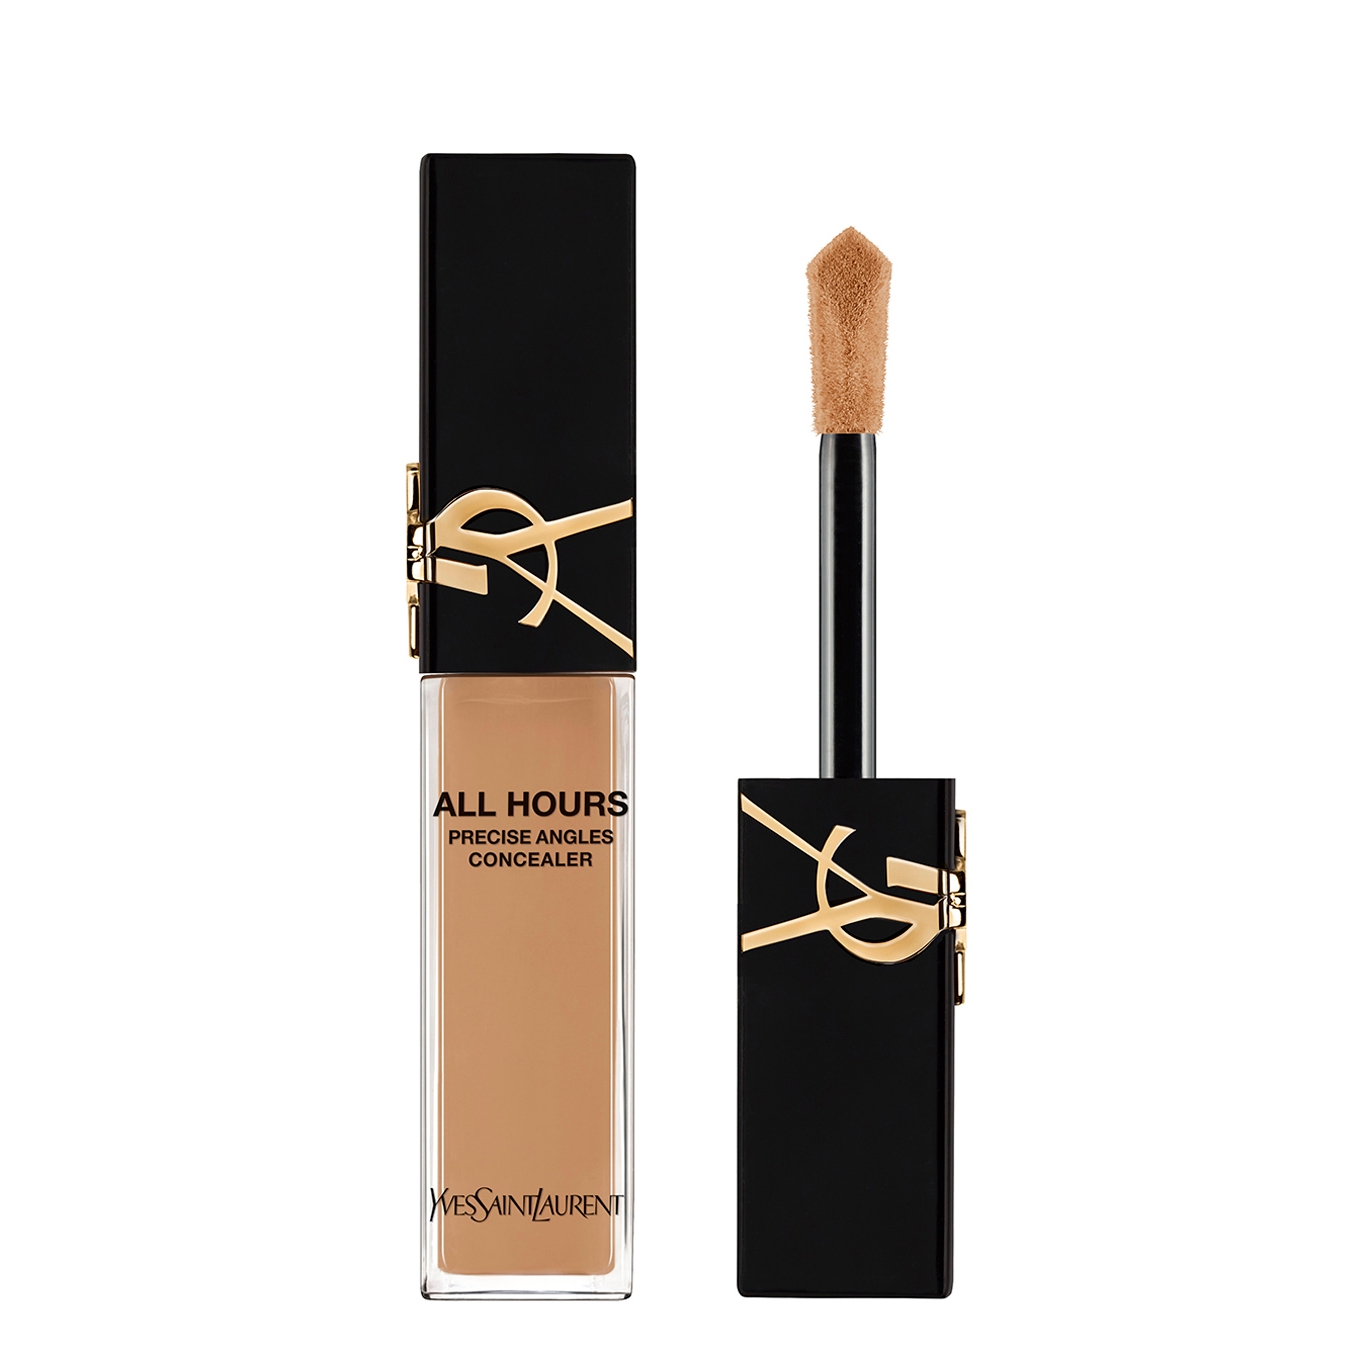 Yves Saint Laurent All Hours Precise Angles Concealer - Colour Mn7